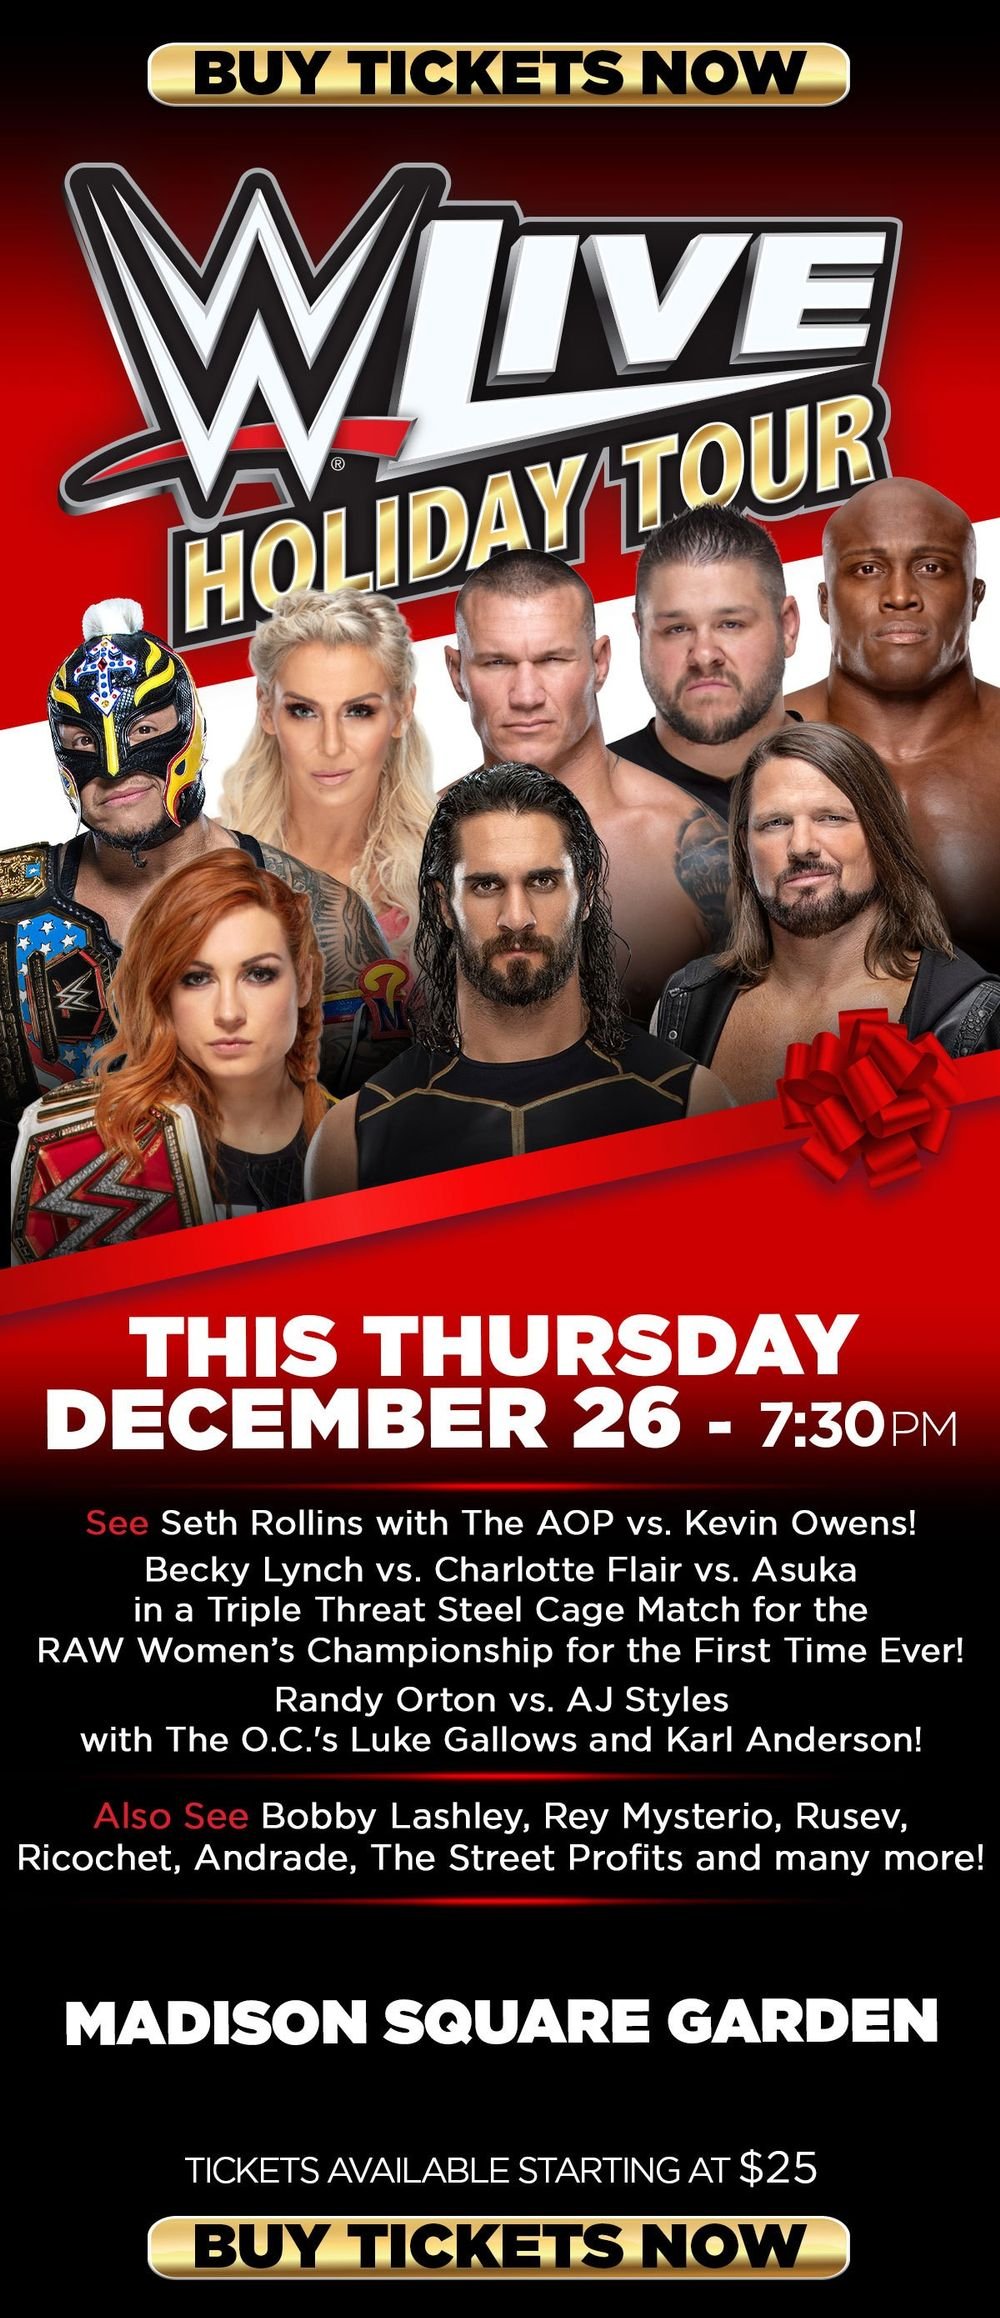 WWE Shop NEW YORK CITY! This Thursday, WWE Live Holiday Tour comes to